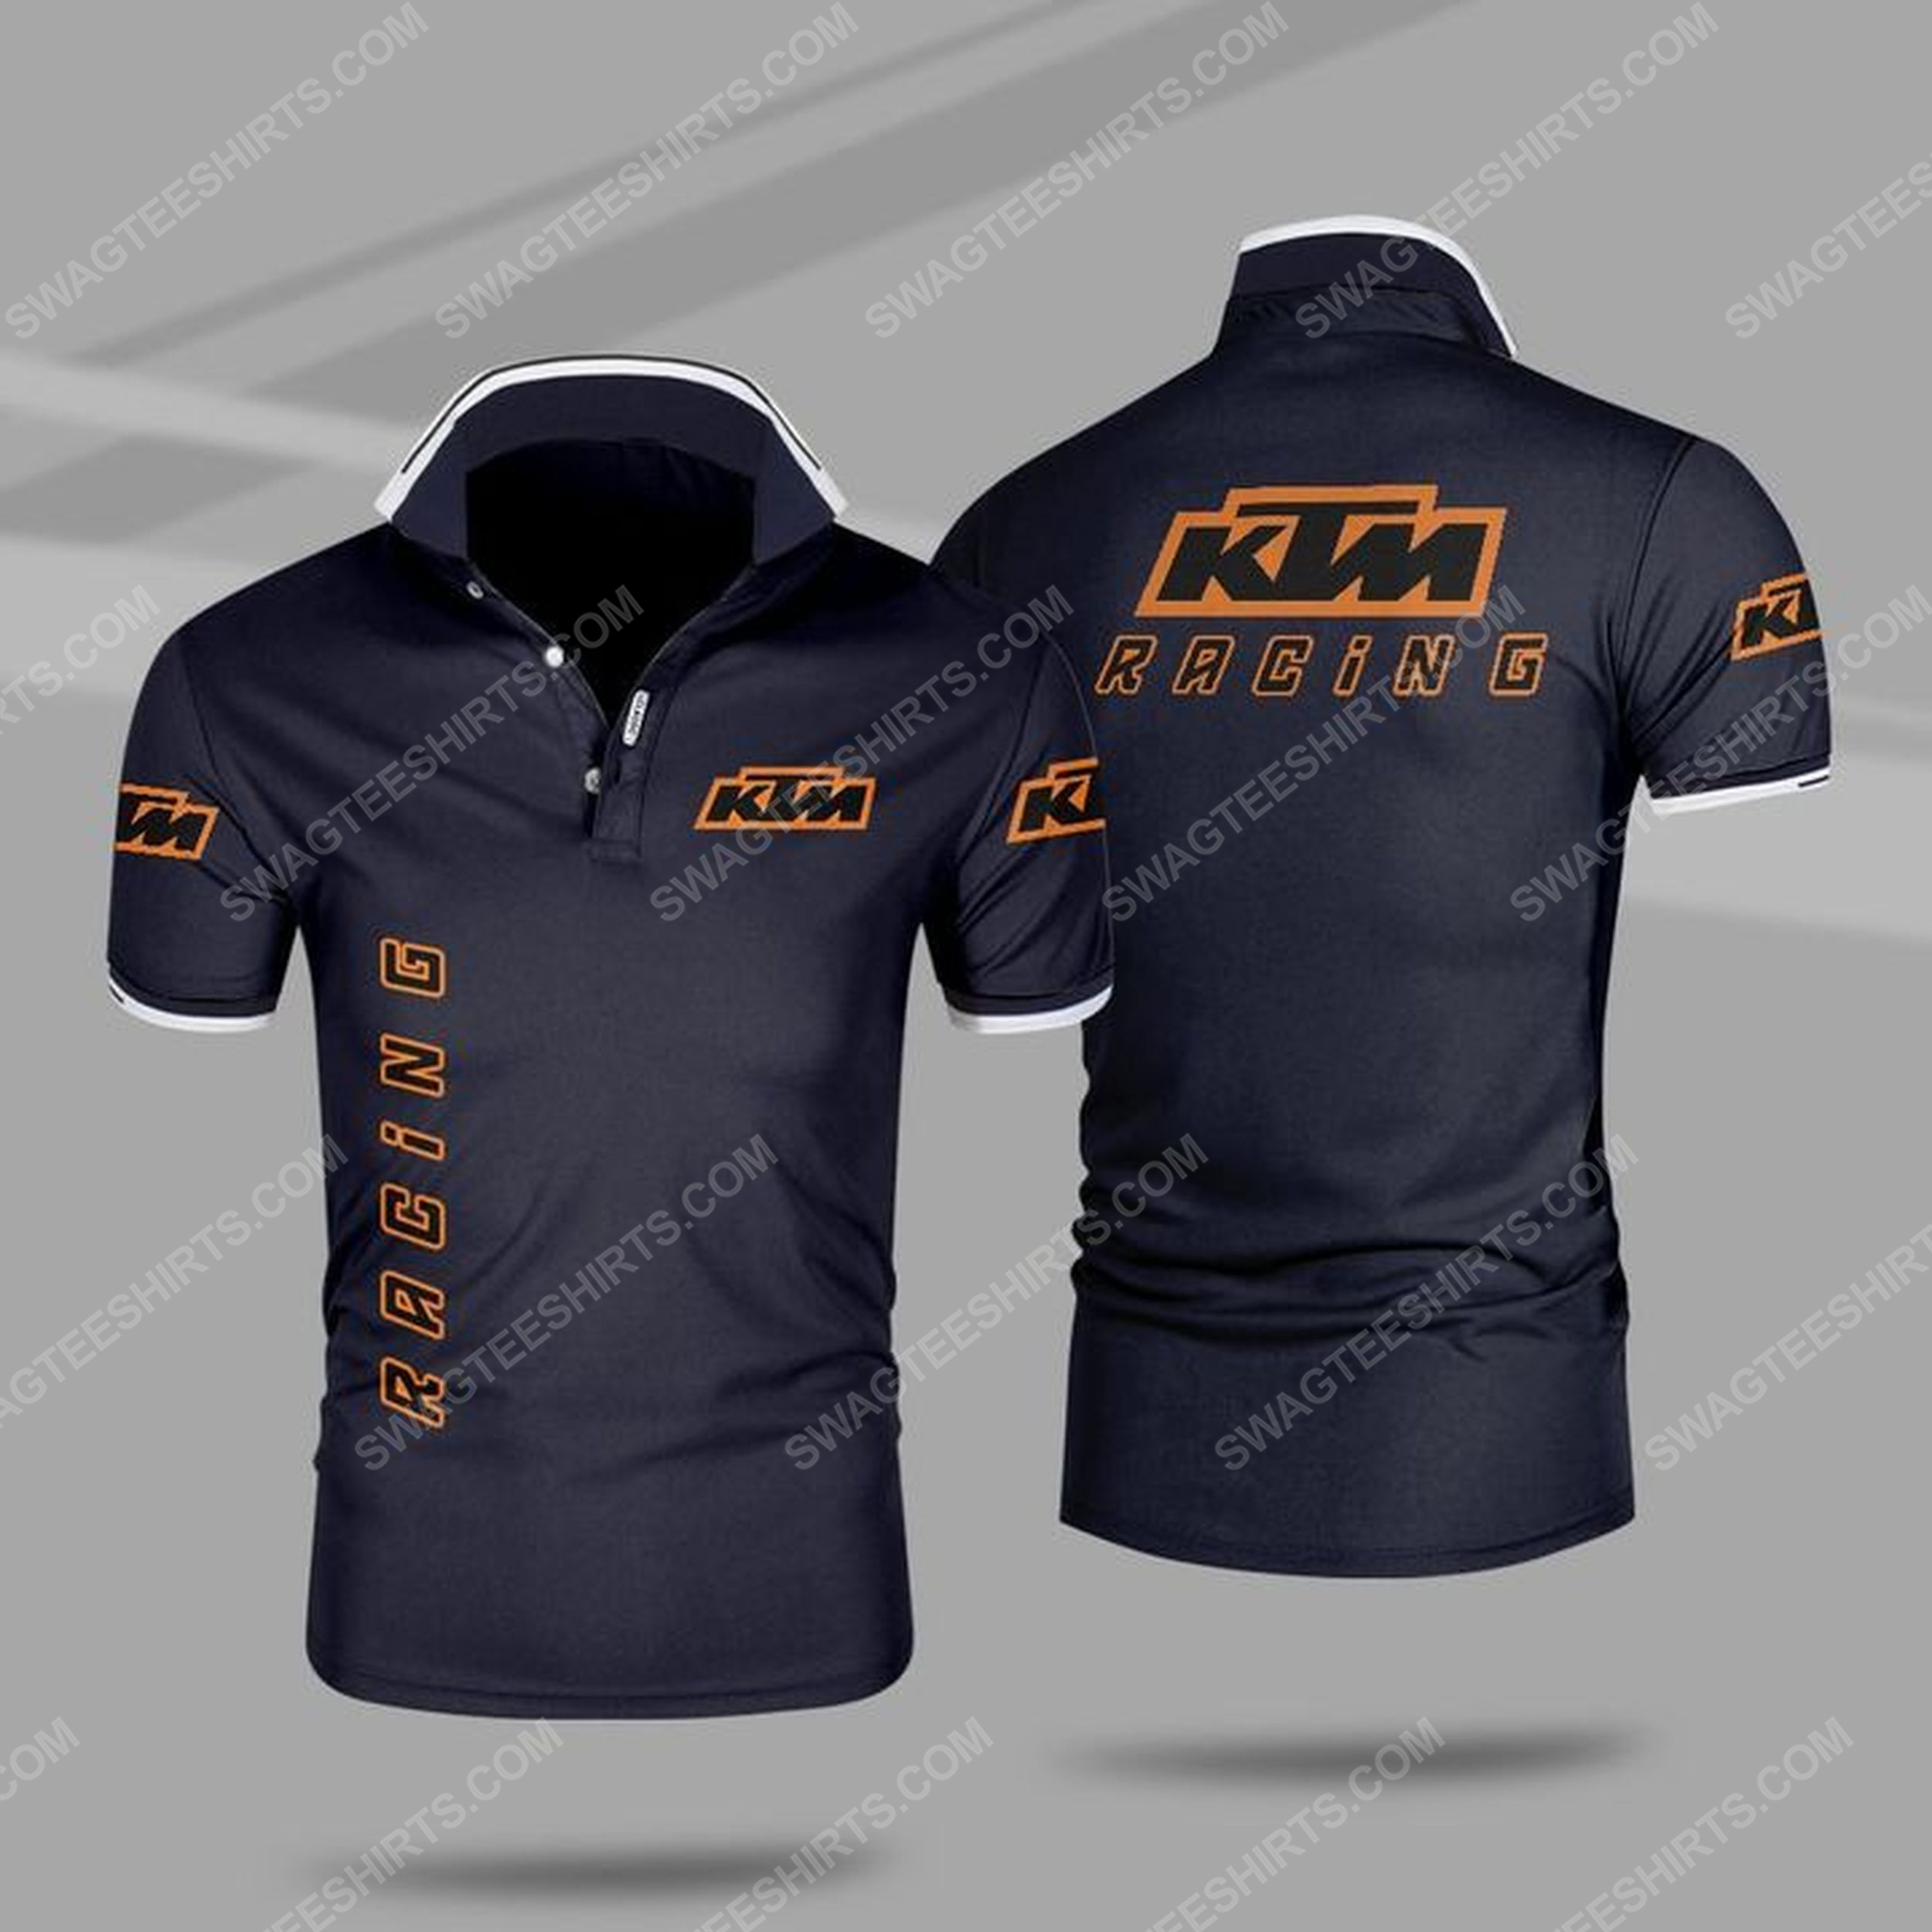 The ktm motorcycle racing all over print polo shirt - navy 1 - Copy